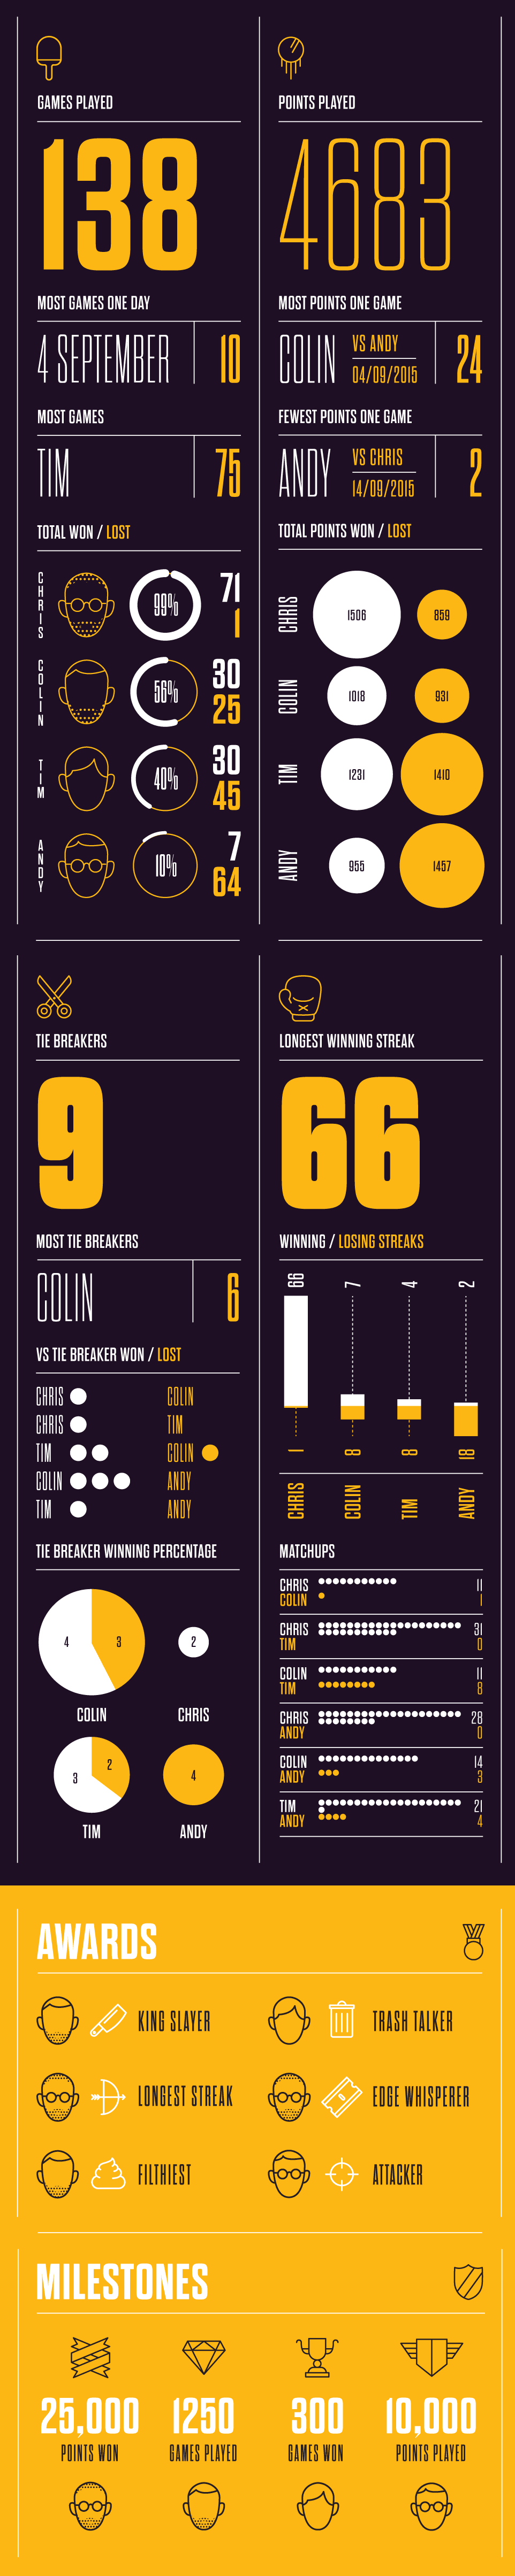 Spring-stats-all